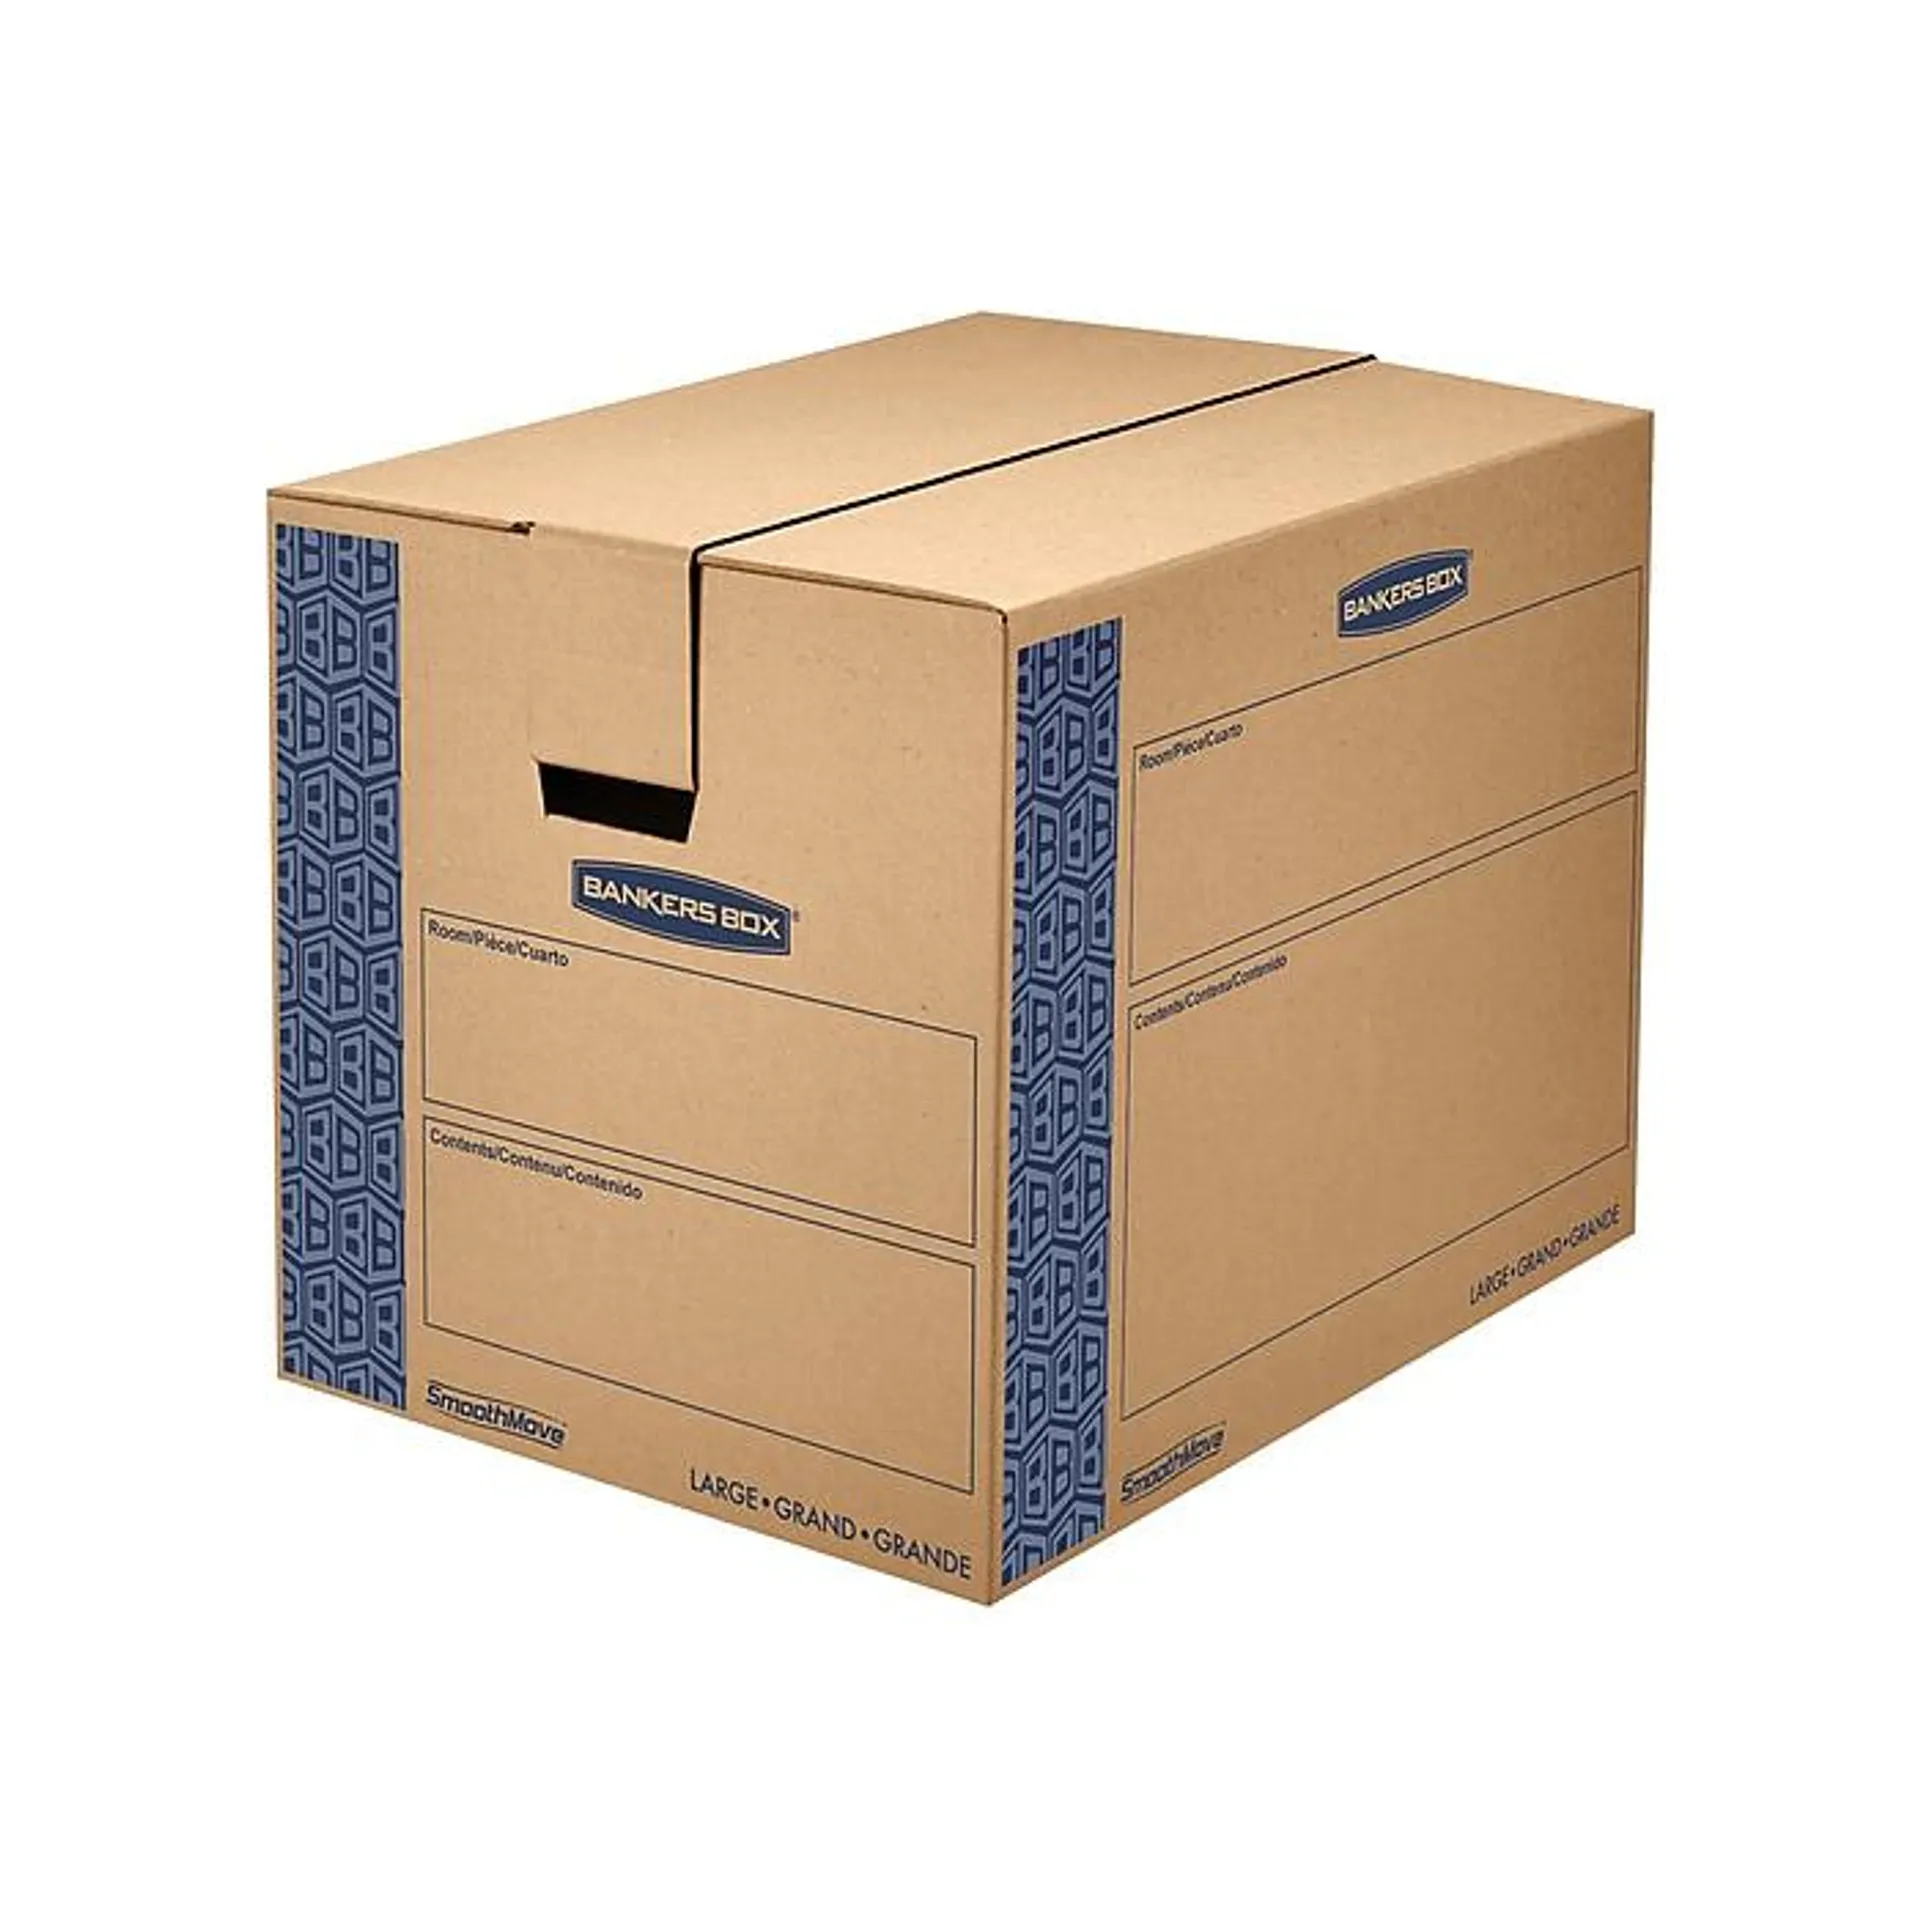 Bankers Box® SmoothMove 24" x 18" x 18" Moving Box,